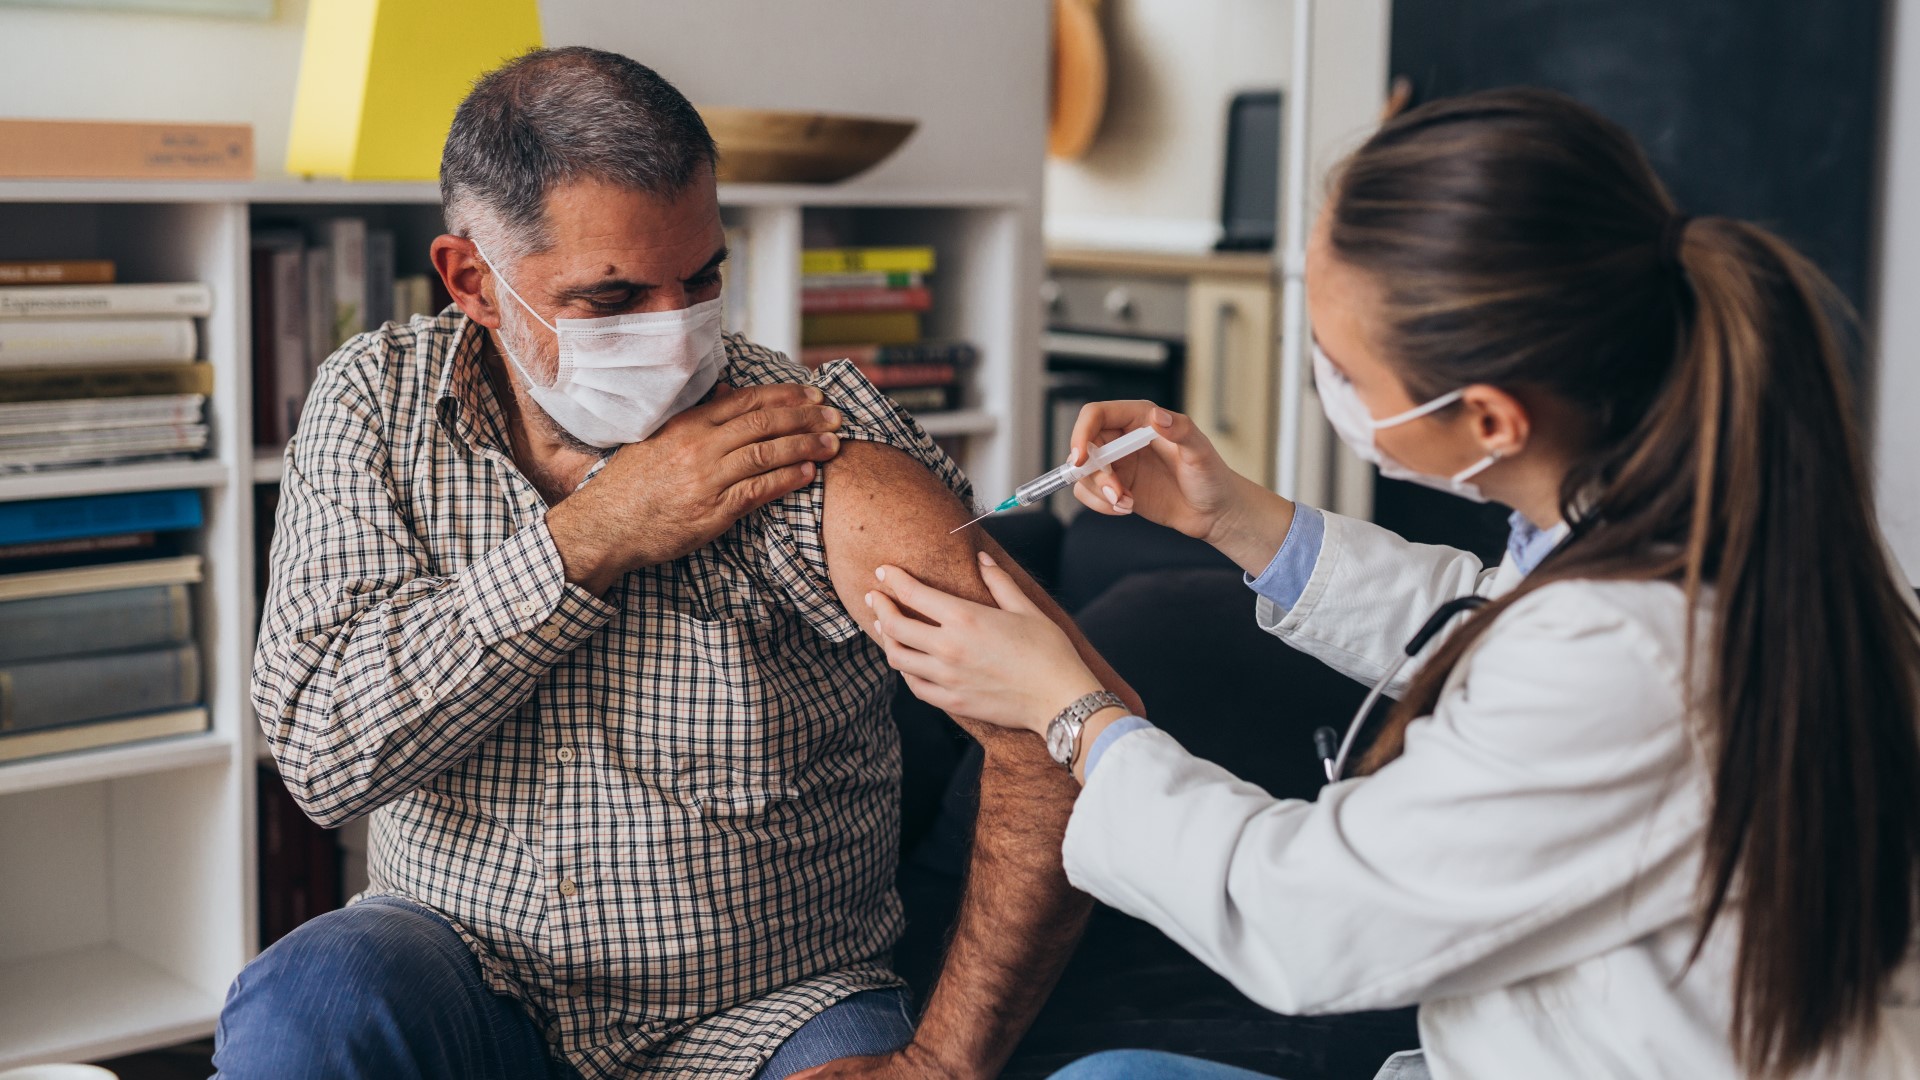 With flu season right around the corner, many have been asking if it's safe to get the COVID-19 shot and the flu shot together.